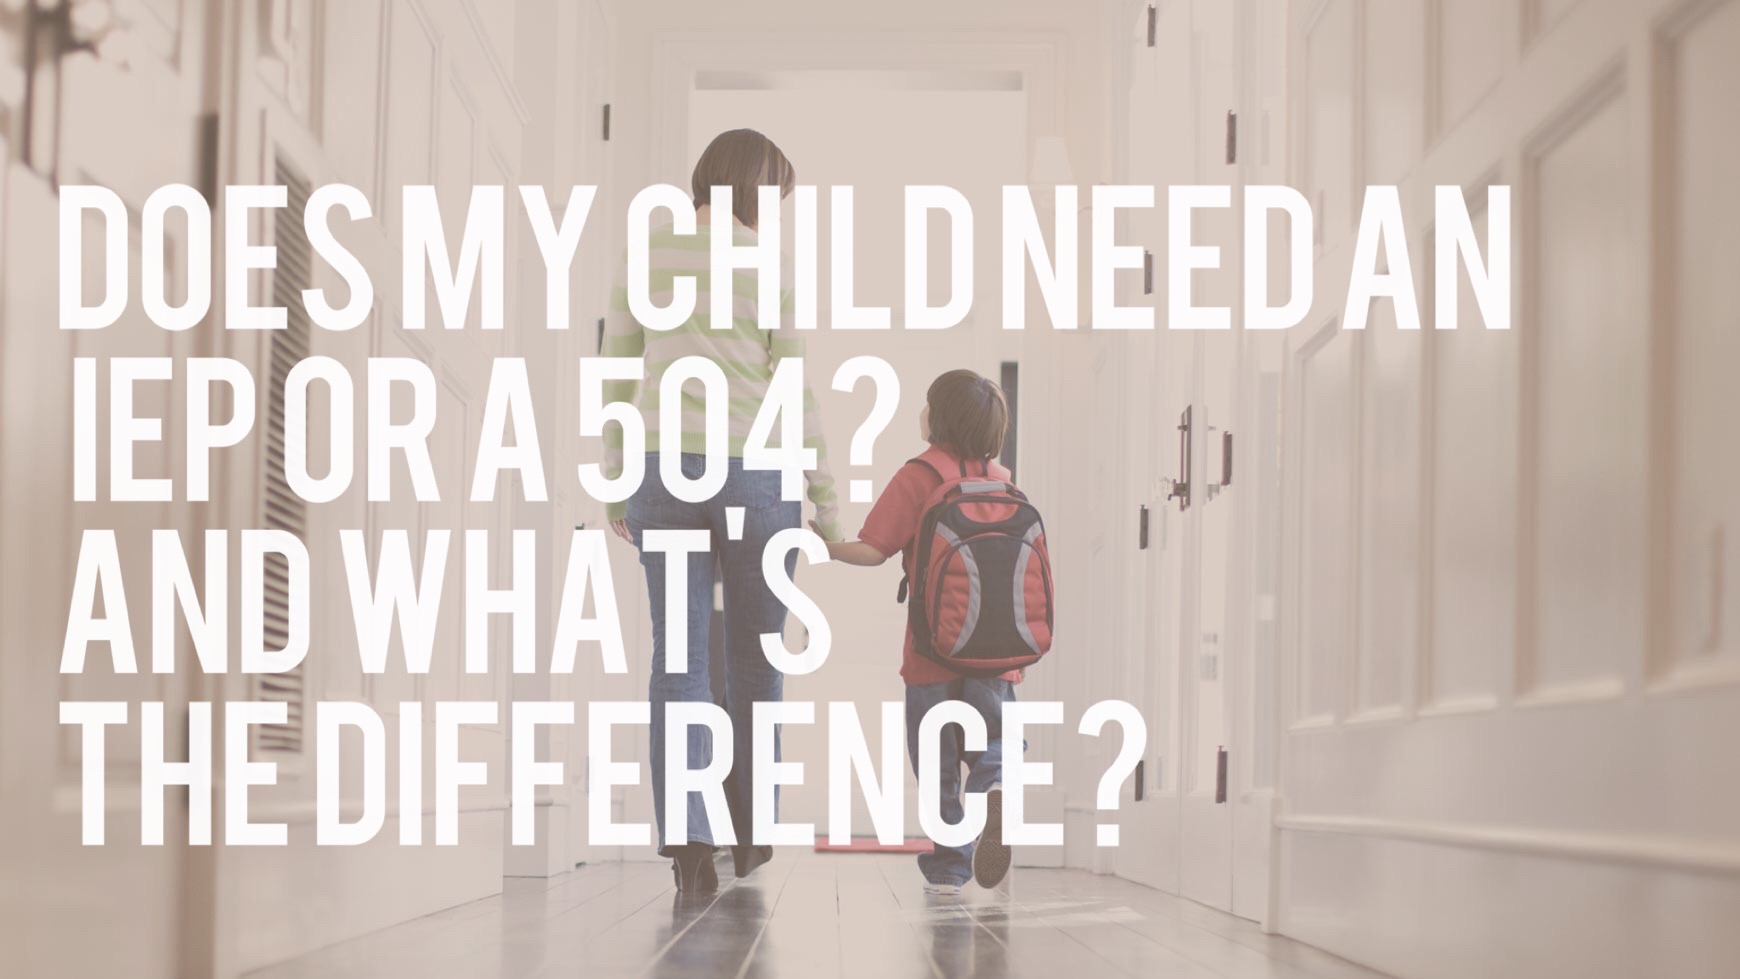 Child-Need-IEP-504-Difference